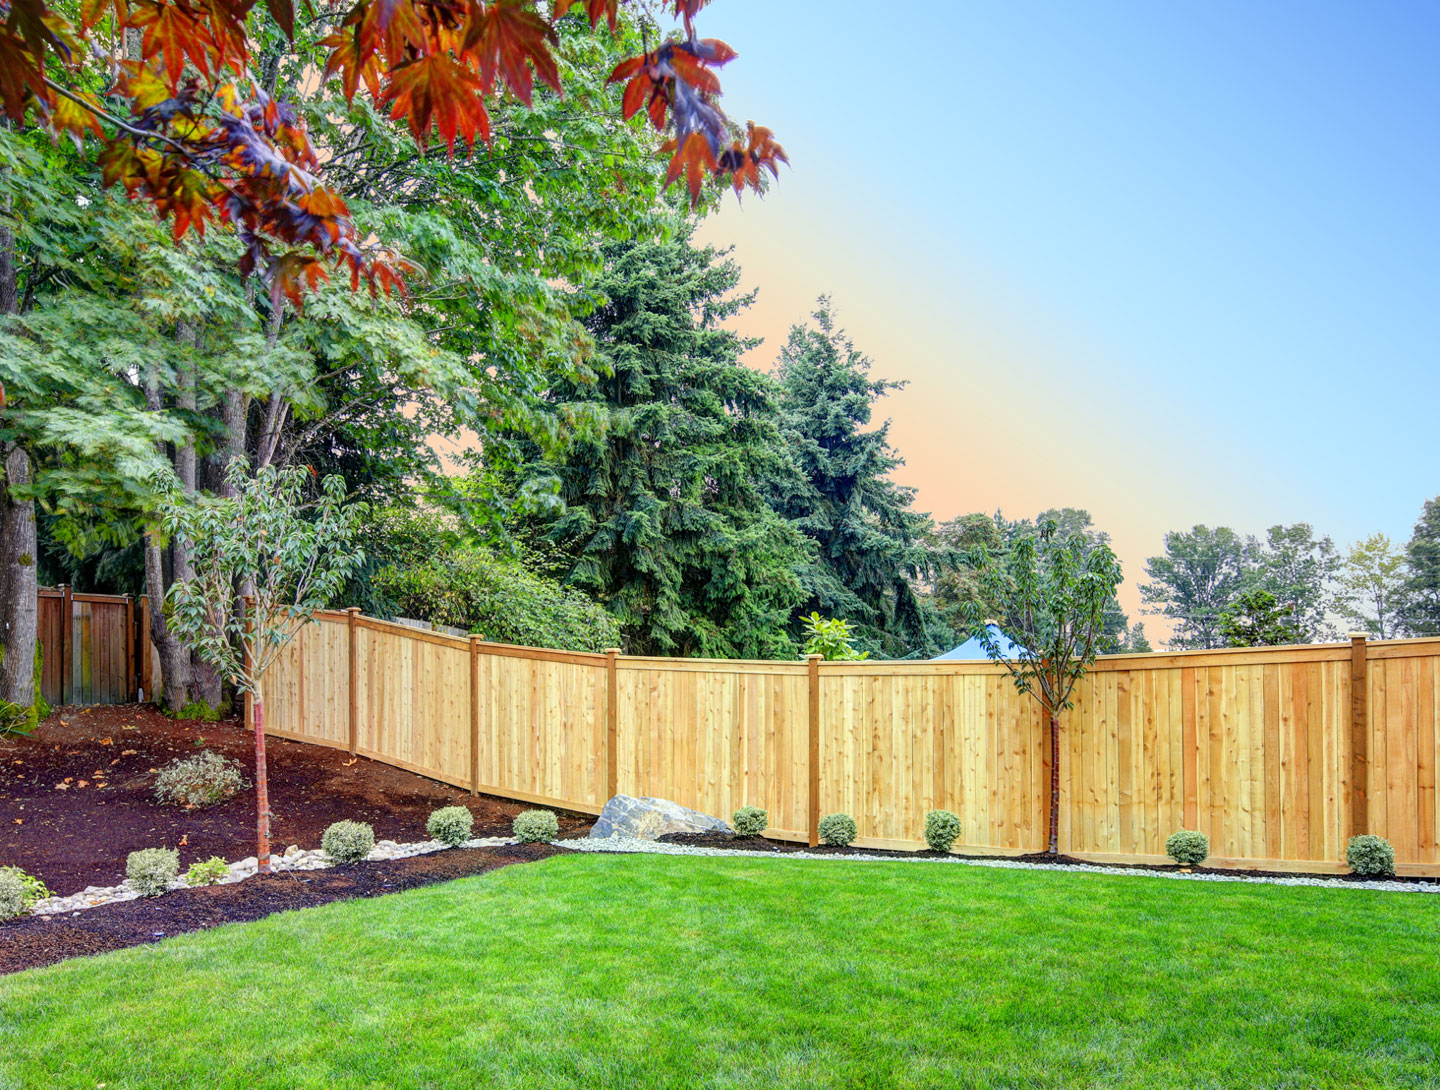 Fence Easement Agreement Ergeon What Is A Good Neighbor Fence